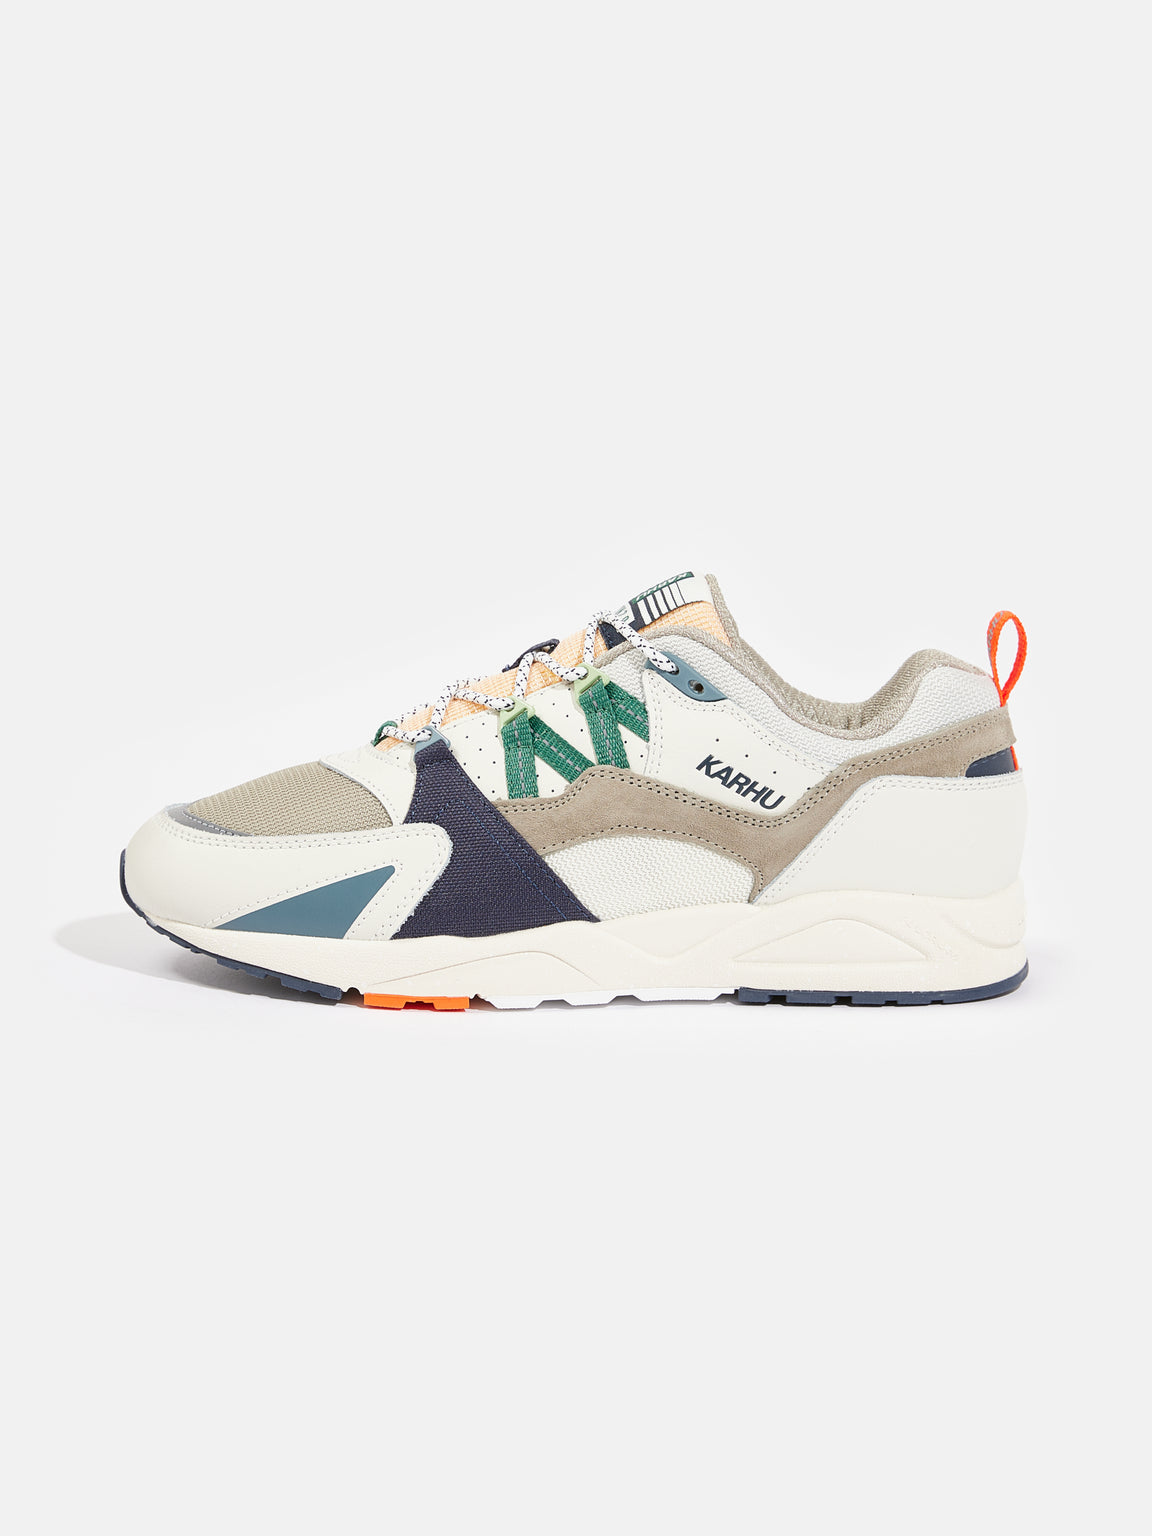 Karhu Legacy 96 'Summer Pack' Shoes - India Ink/Stormy Weather – Urban  Industry